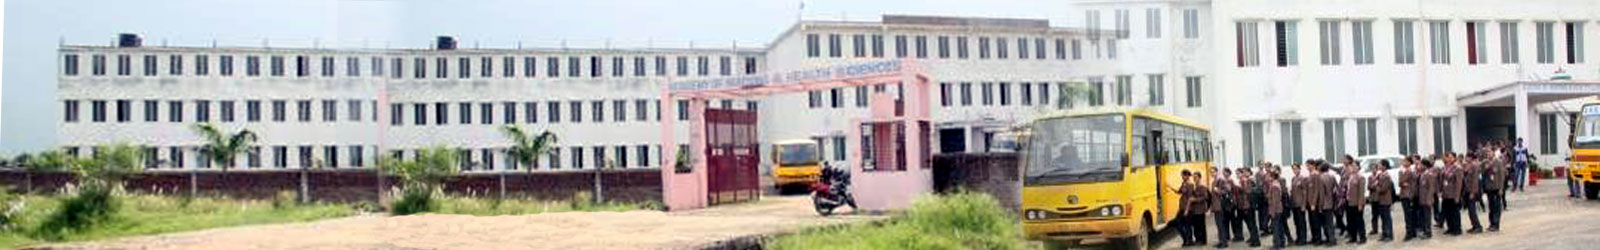 Academy Of Nursing and Health Sciences, Bhopal